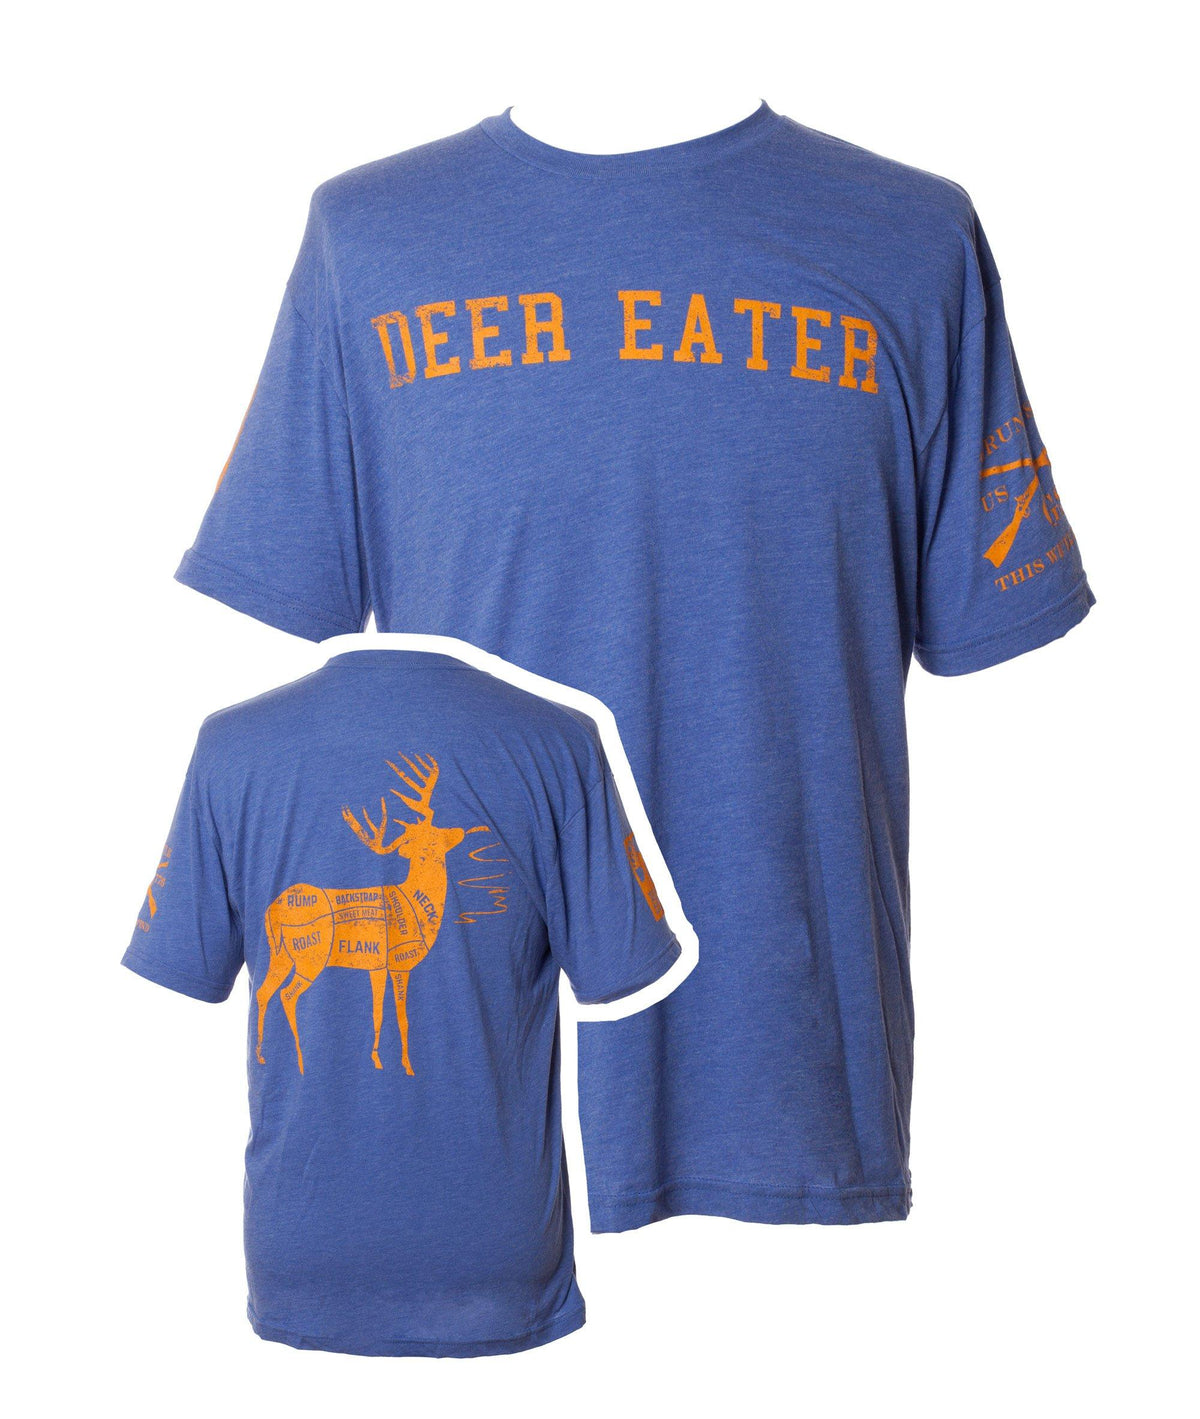 Limited Edition Youth "Grunt Style" Deer Eater Shirt